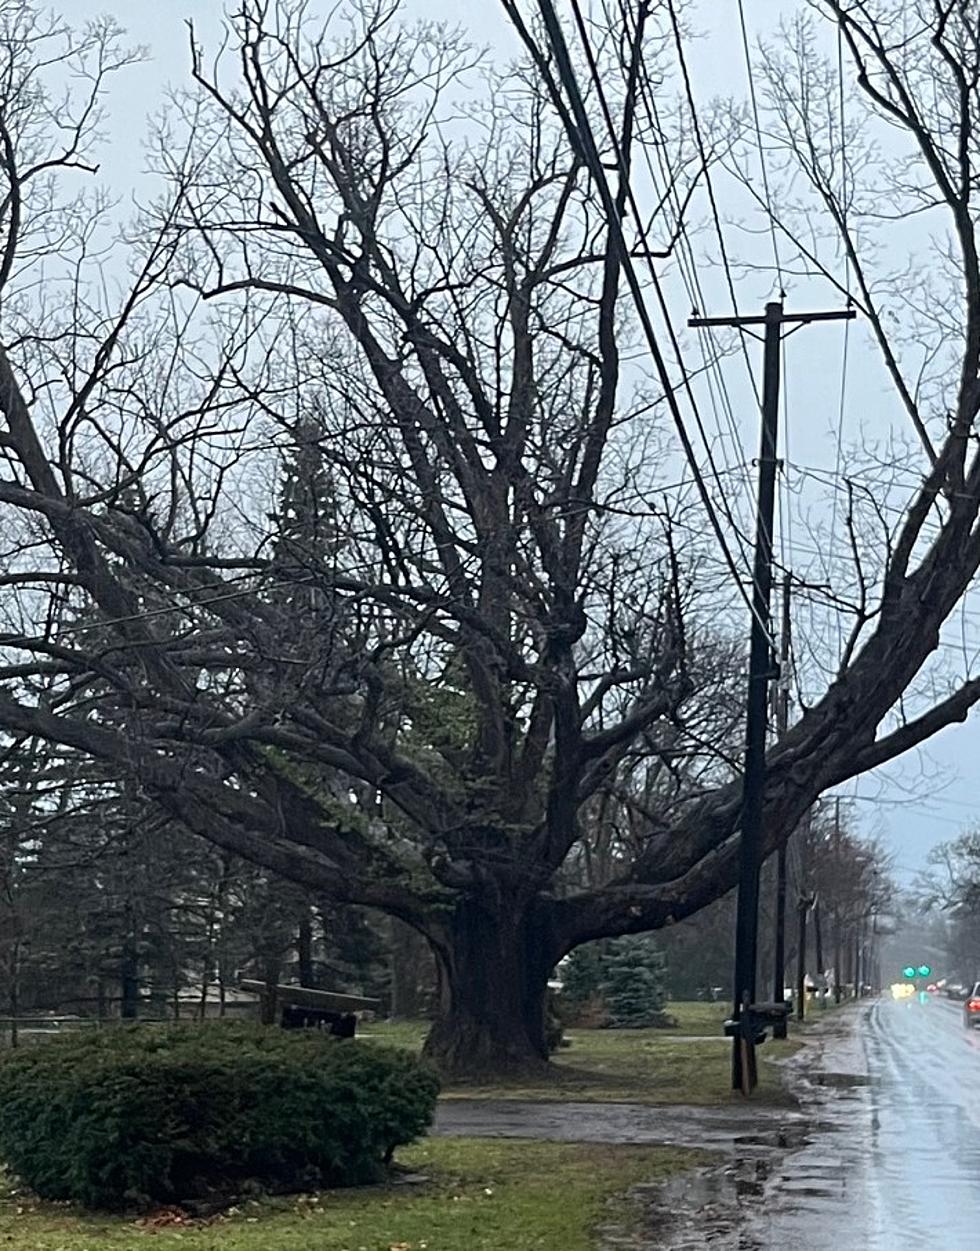 Massive Tree The Oldest In Western New York?